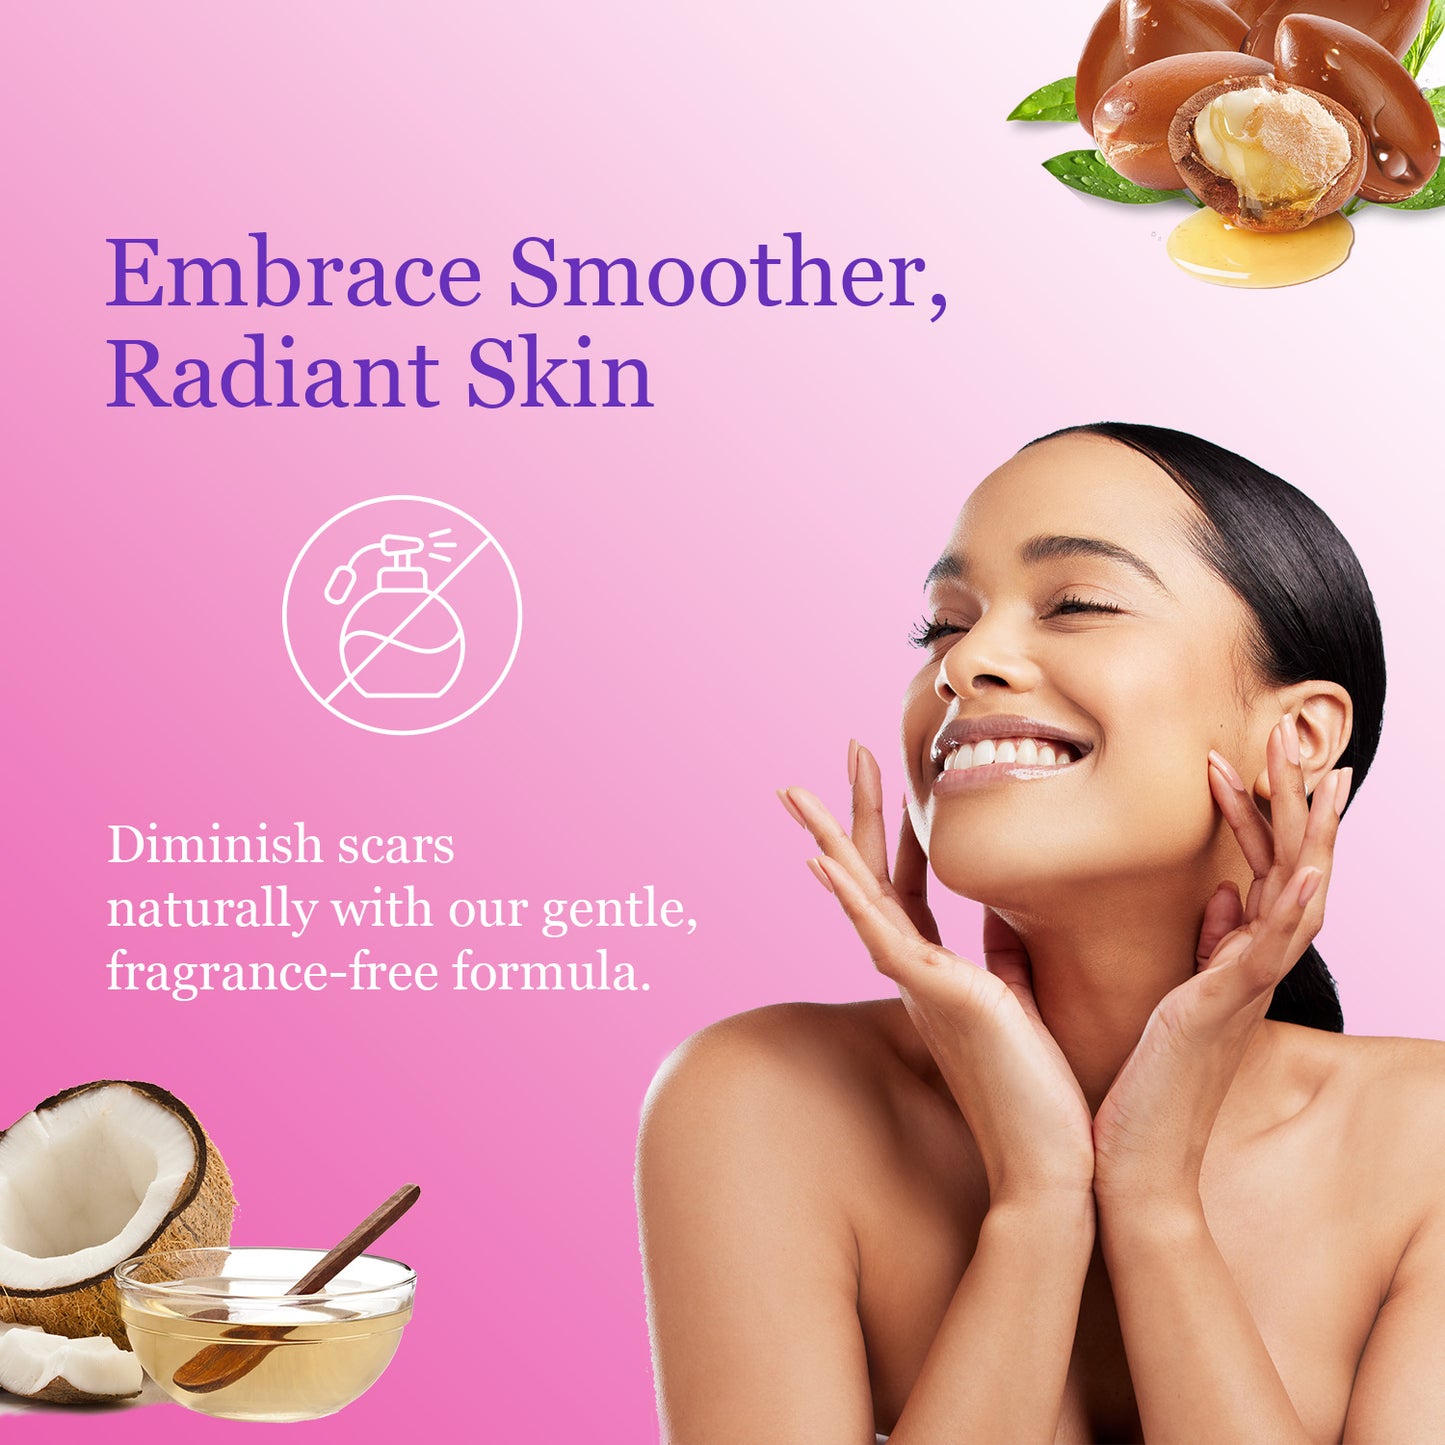 Embrace Smoother, Radiant Skin. Diminish scars naturally with our gentle, fragrance-free formula.